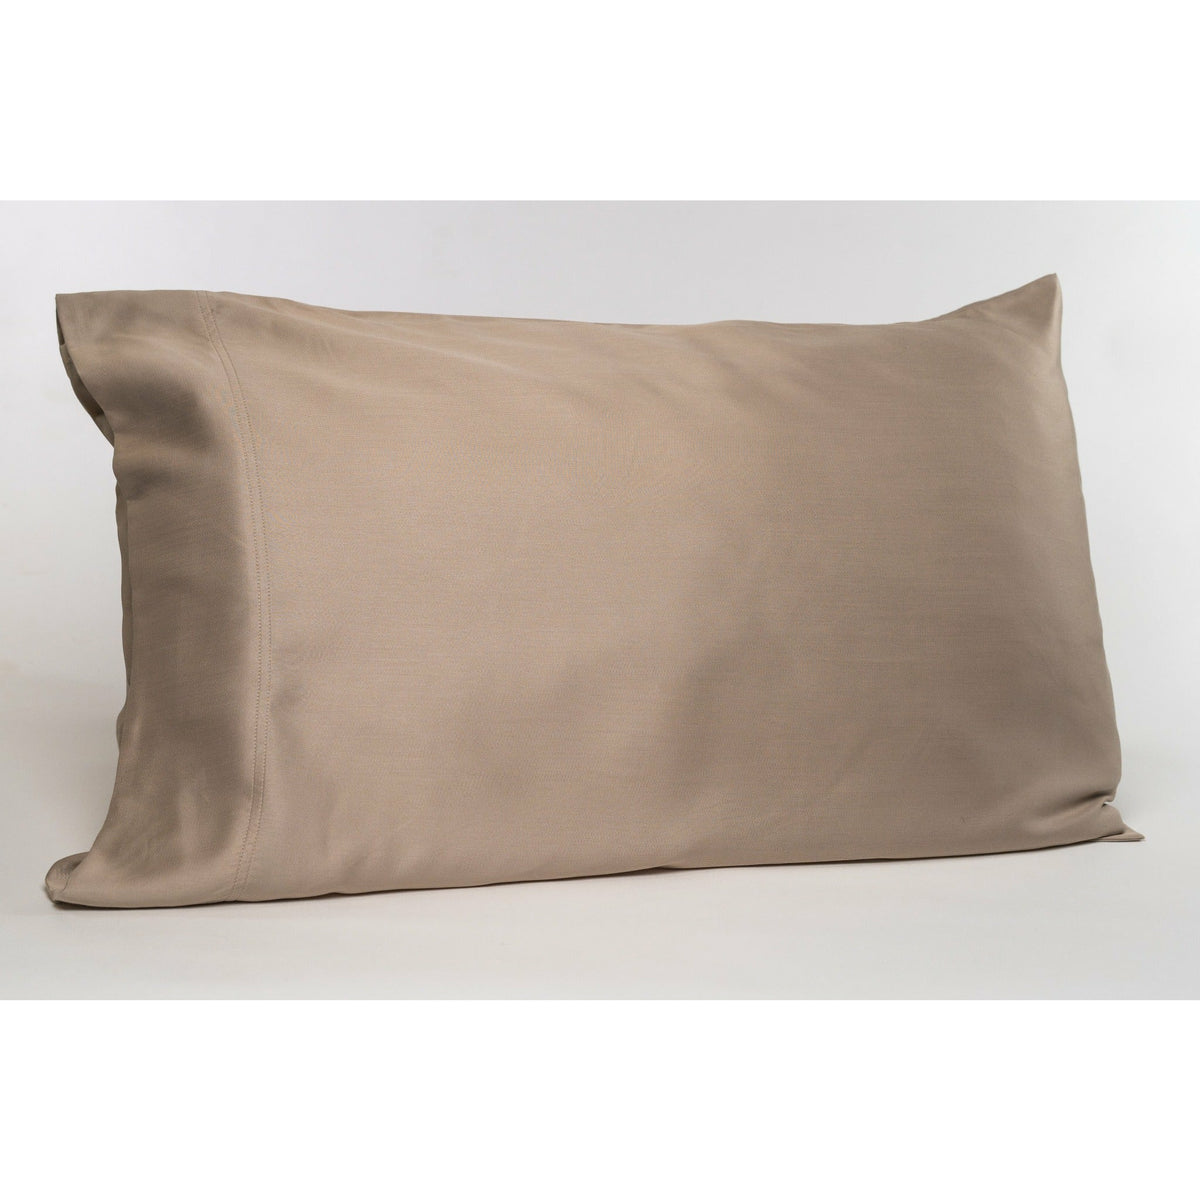 Standard Pillow Cases (Pack of 2)